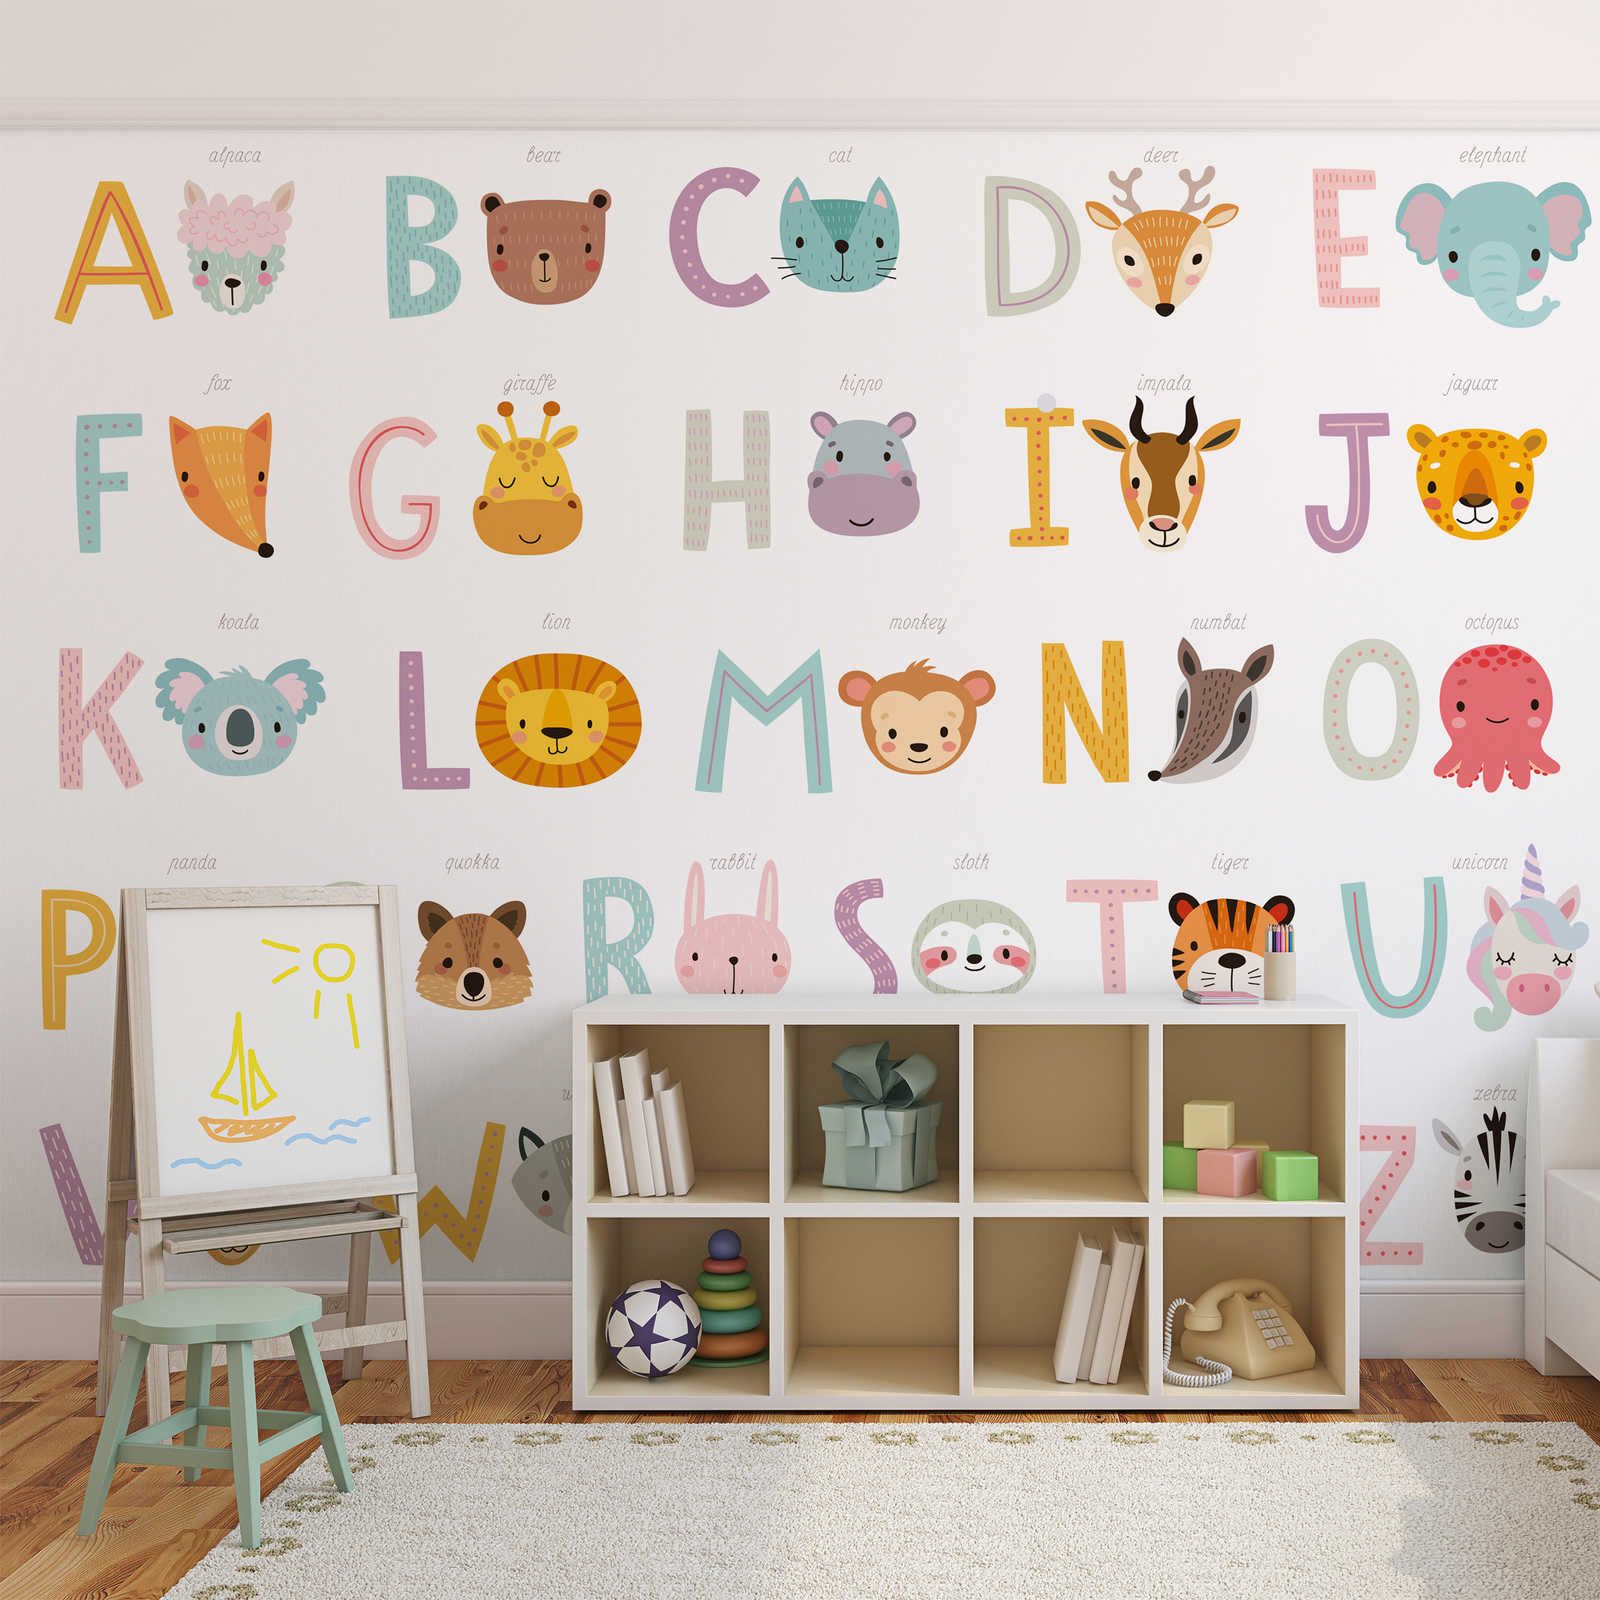 Photo wallpaper ABC with animals and animal names - textured non-woven
